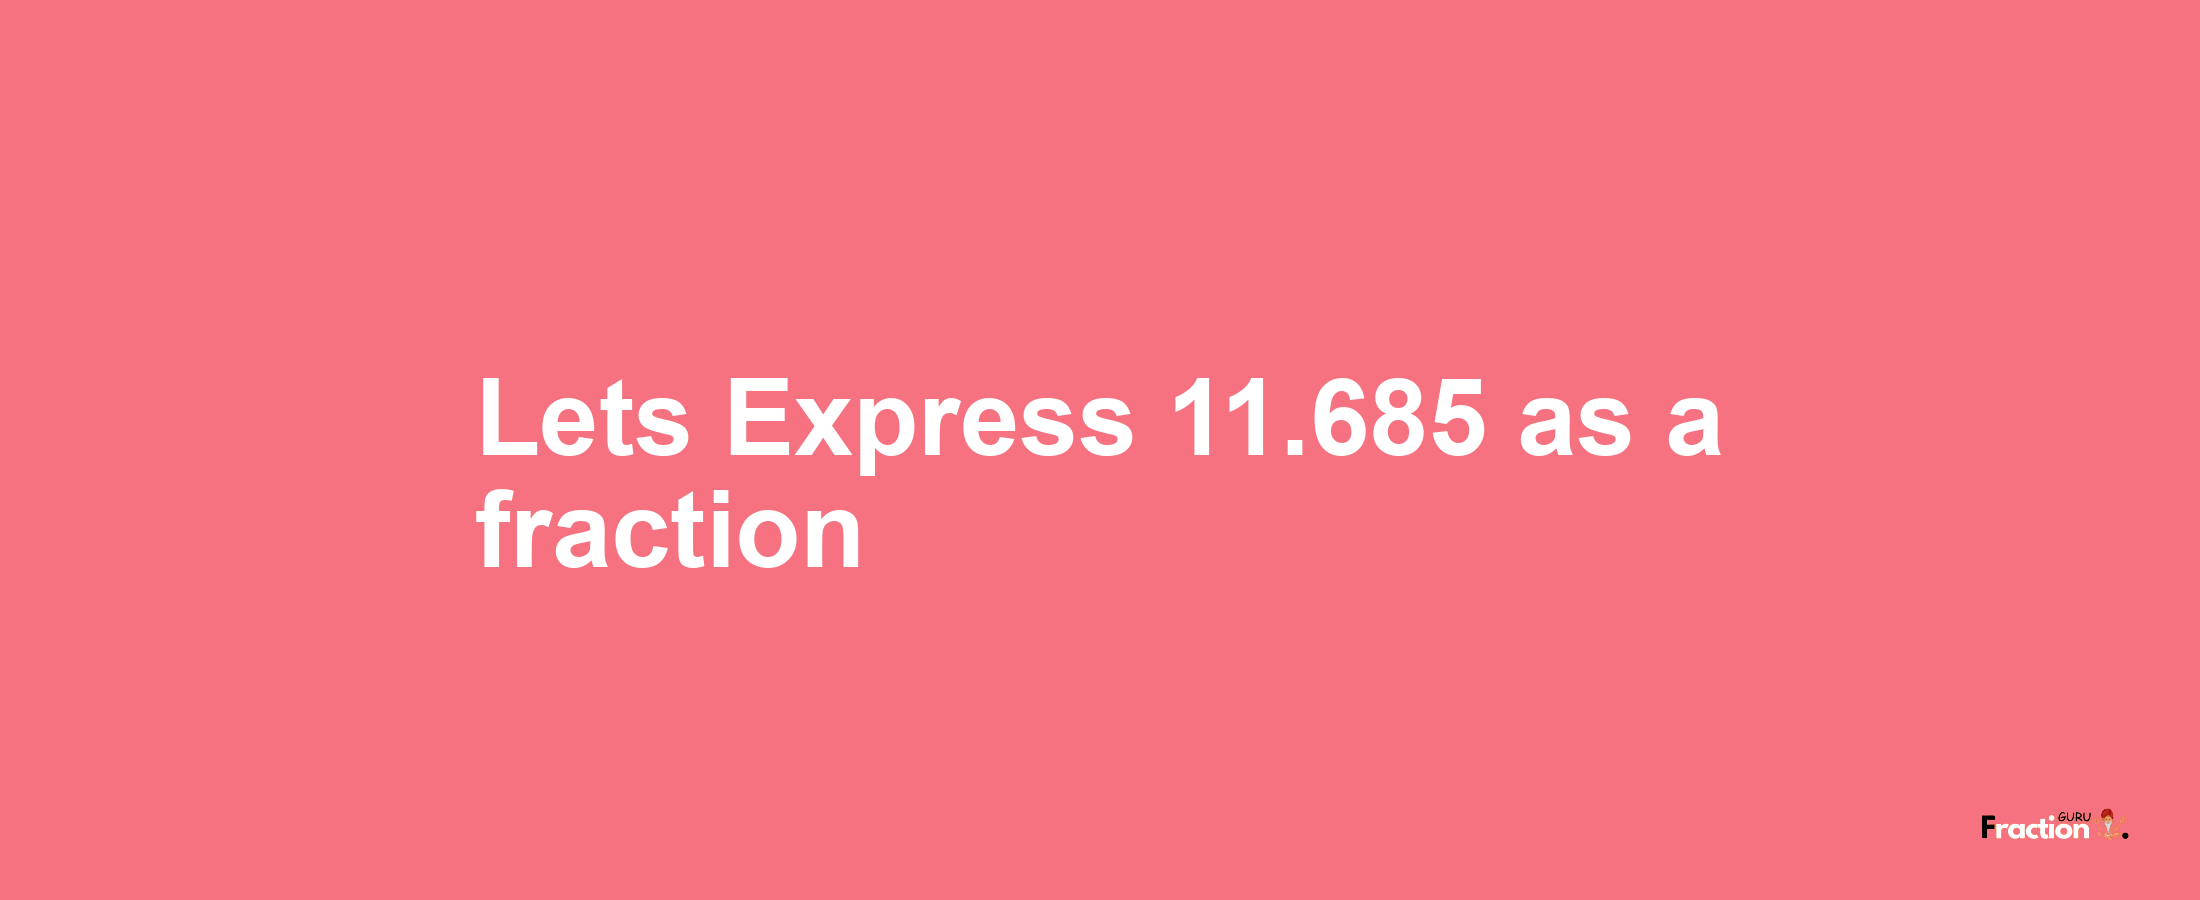 Lets Express 11.685 as afraction